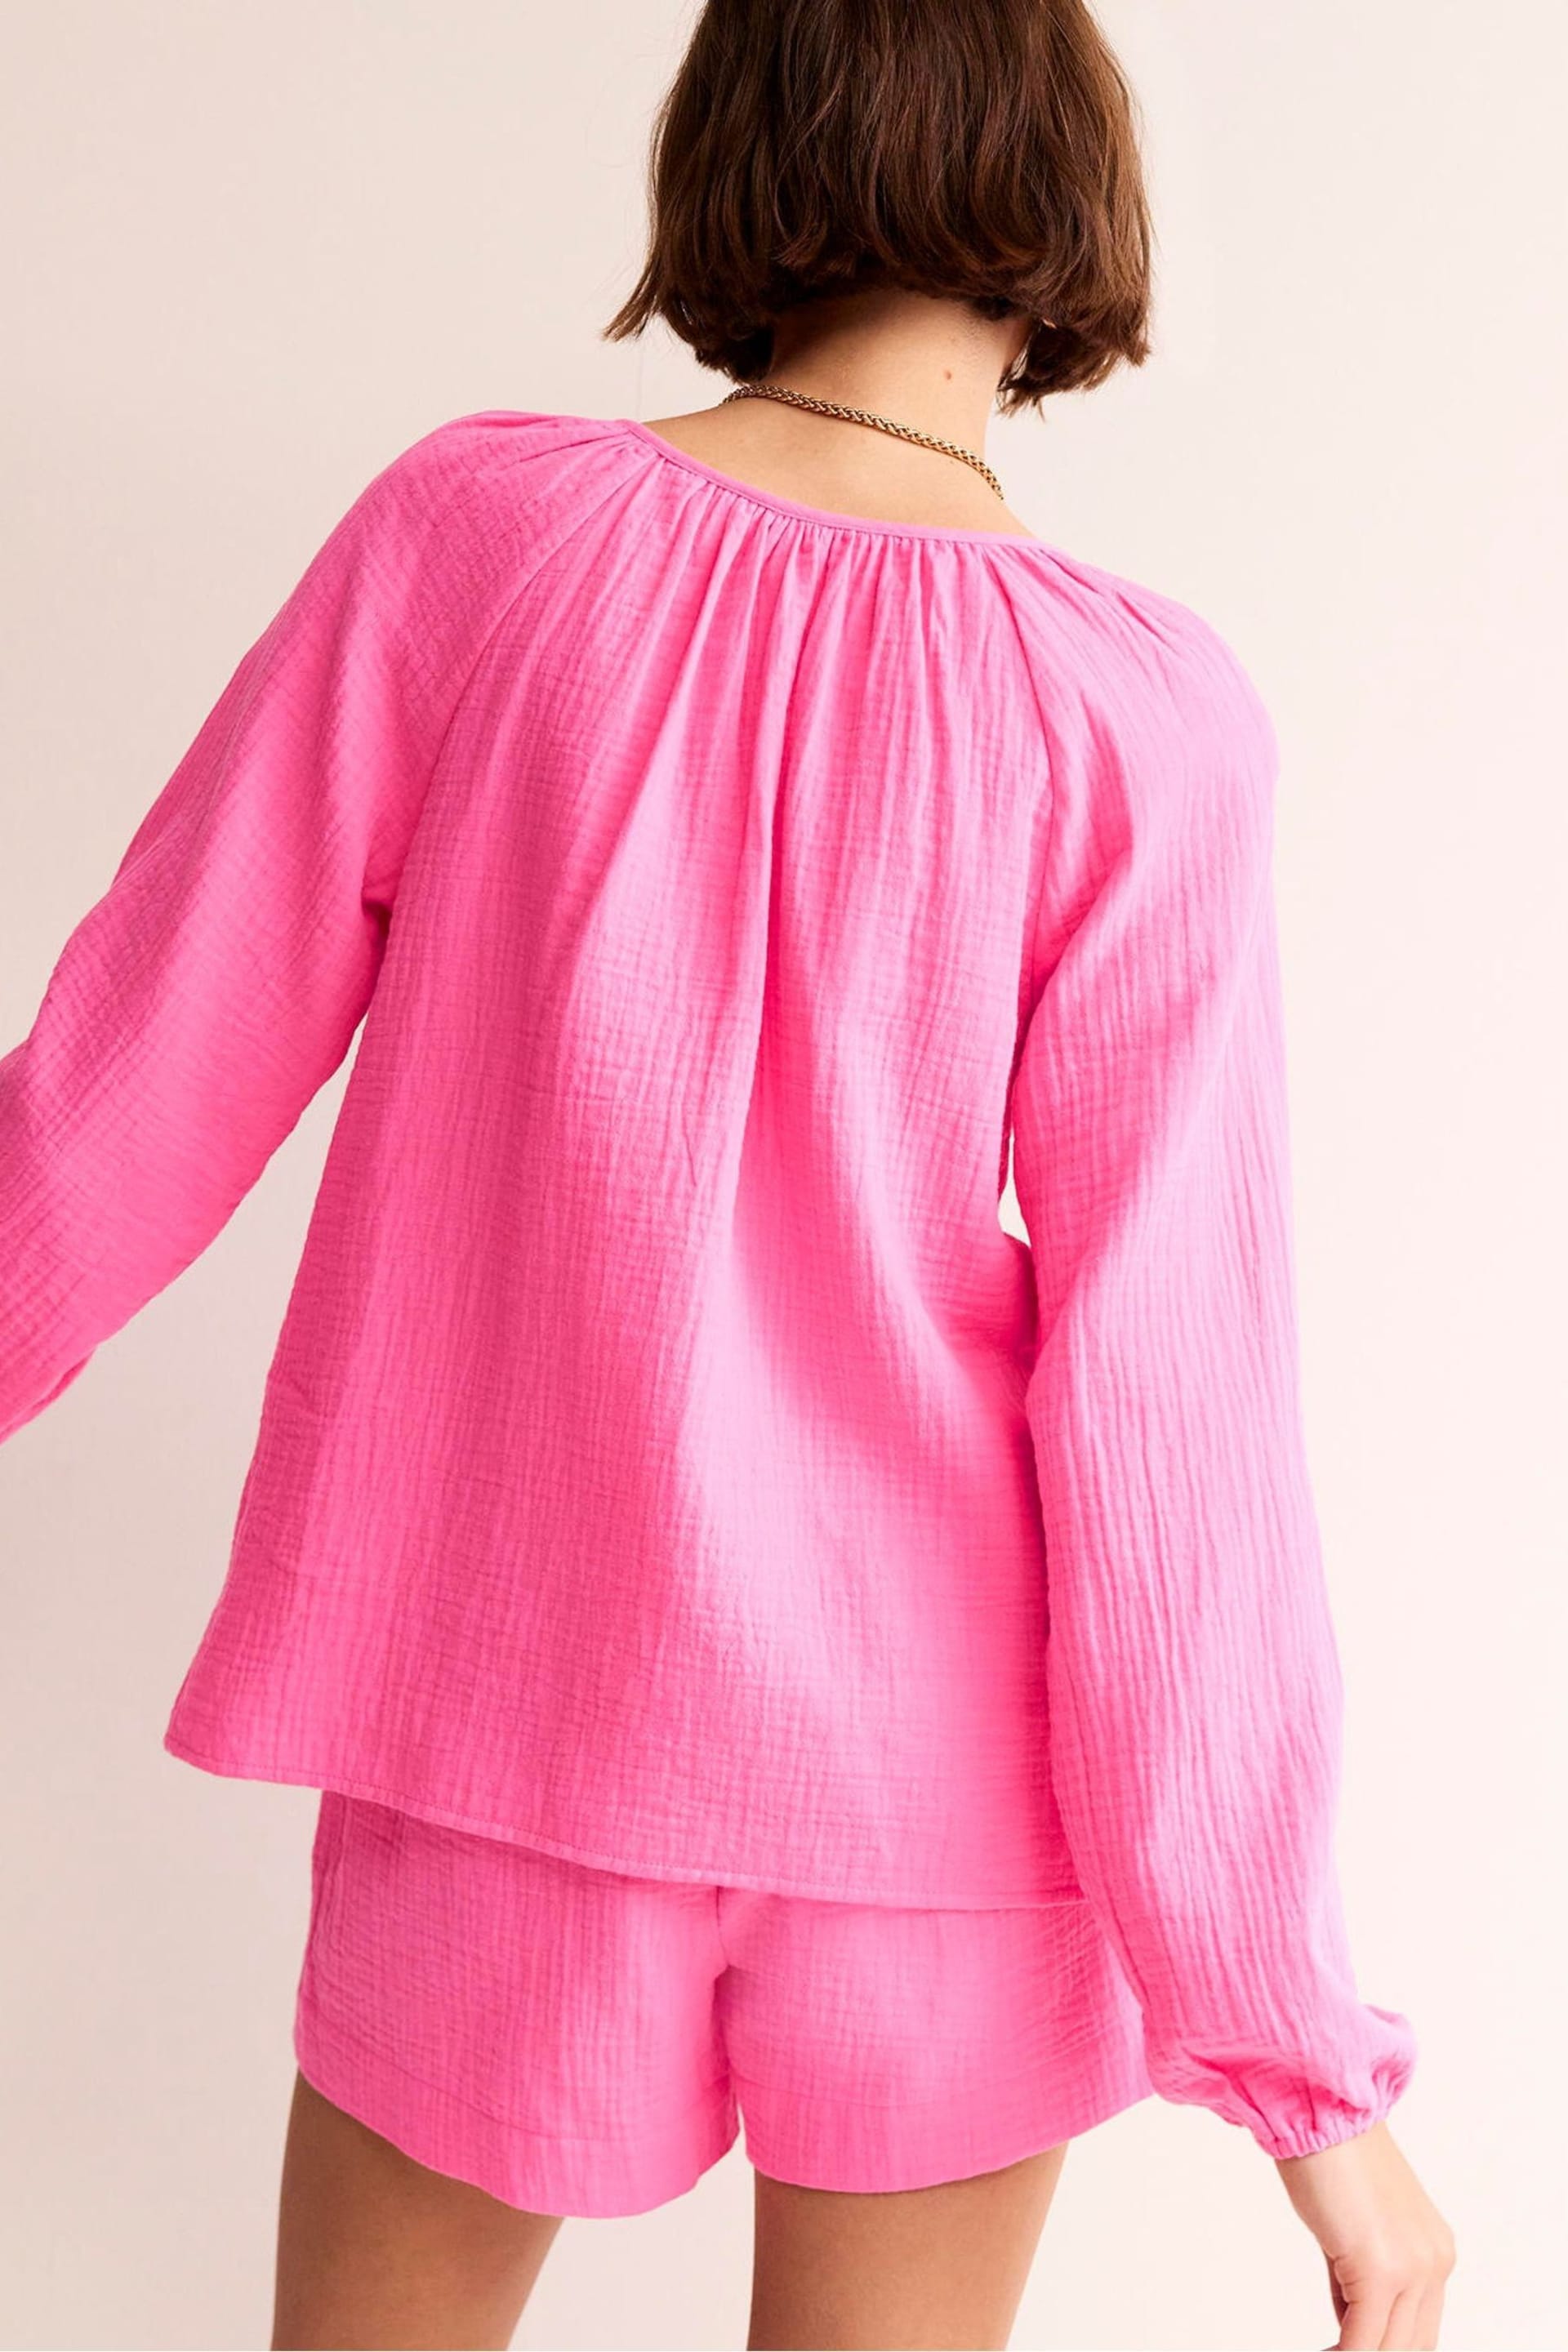 Boden Pink Serena Doublecloth Blouse - Image 2 of 5